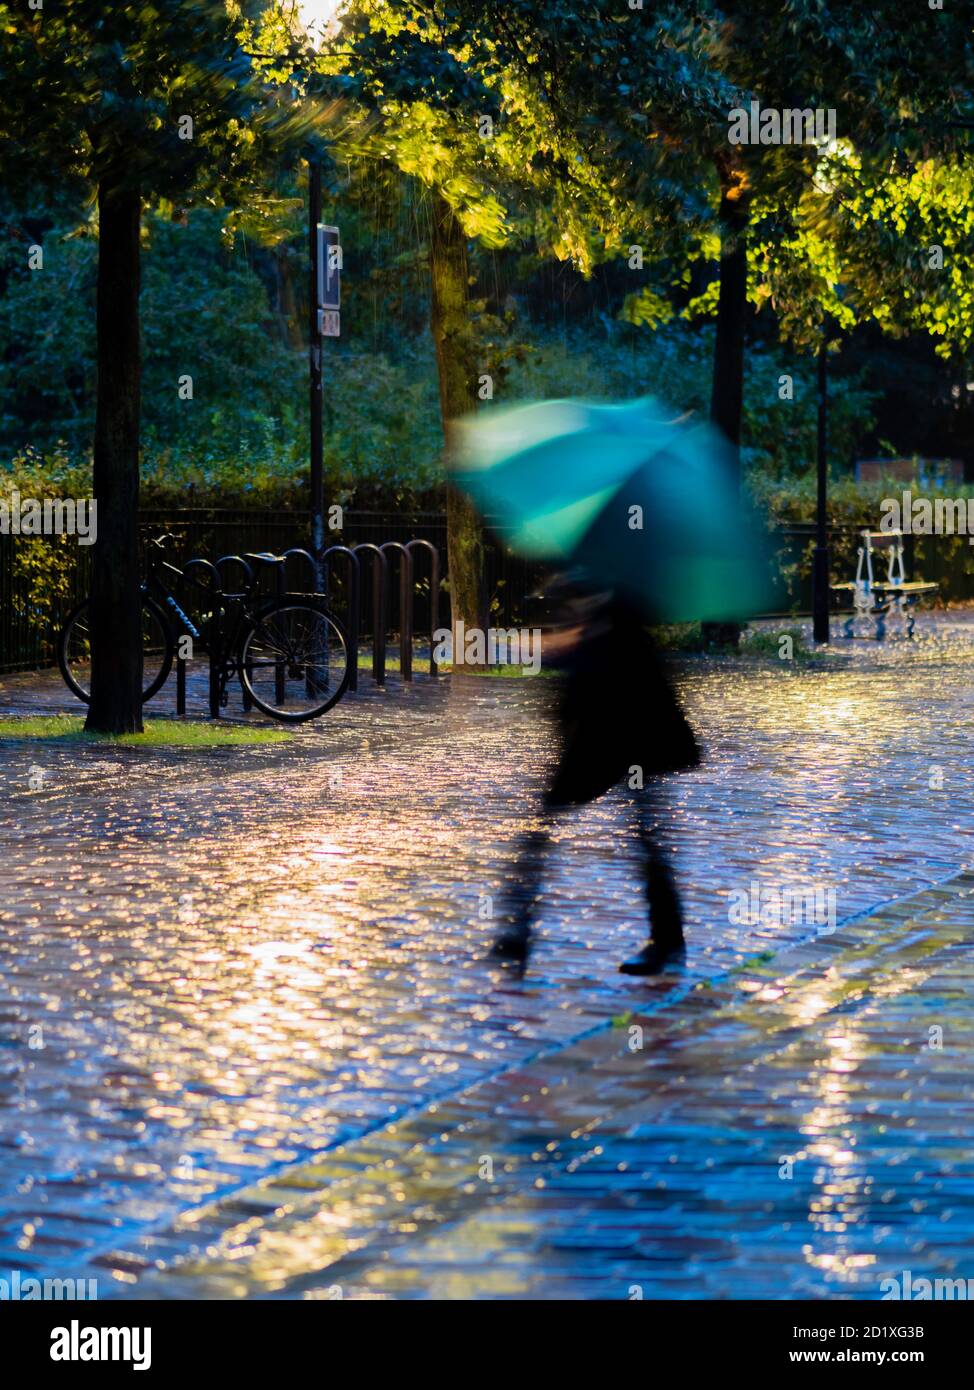 Passerby silhouette with umbrella in a paved wet street under the rain Stock Photo